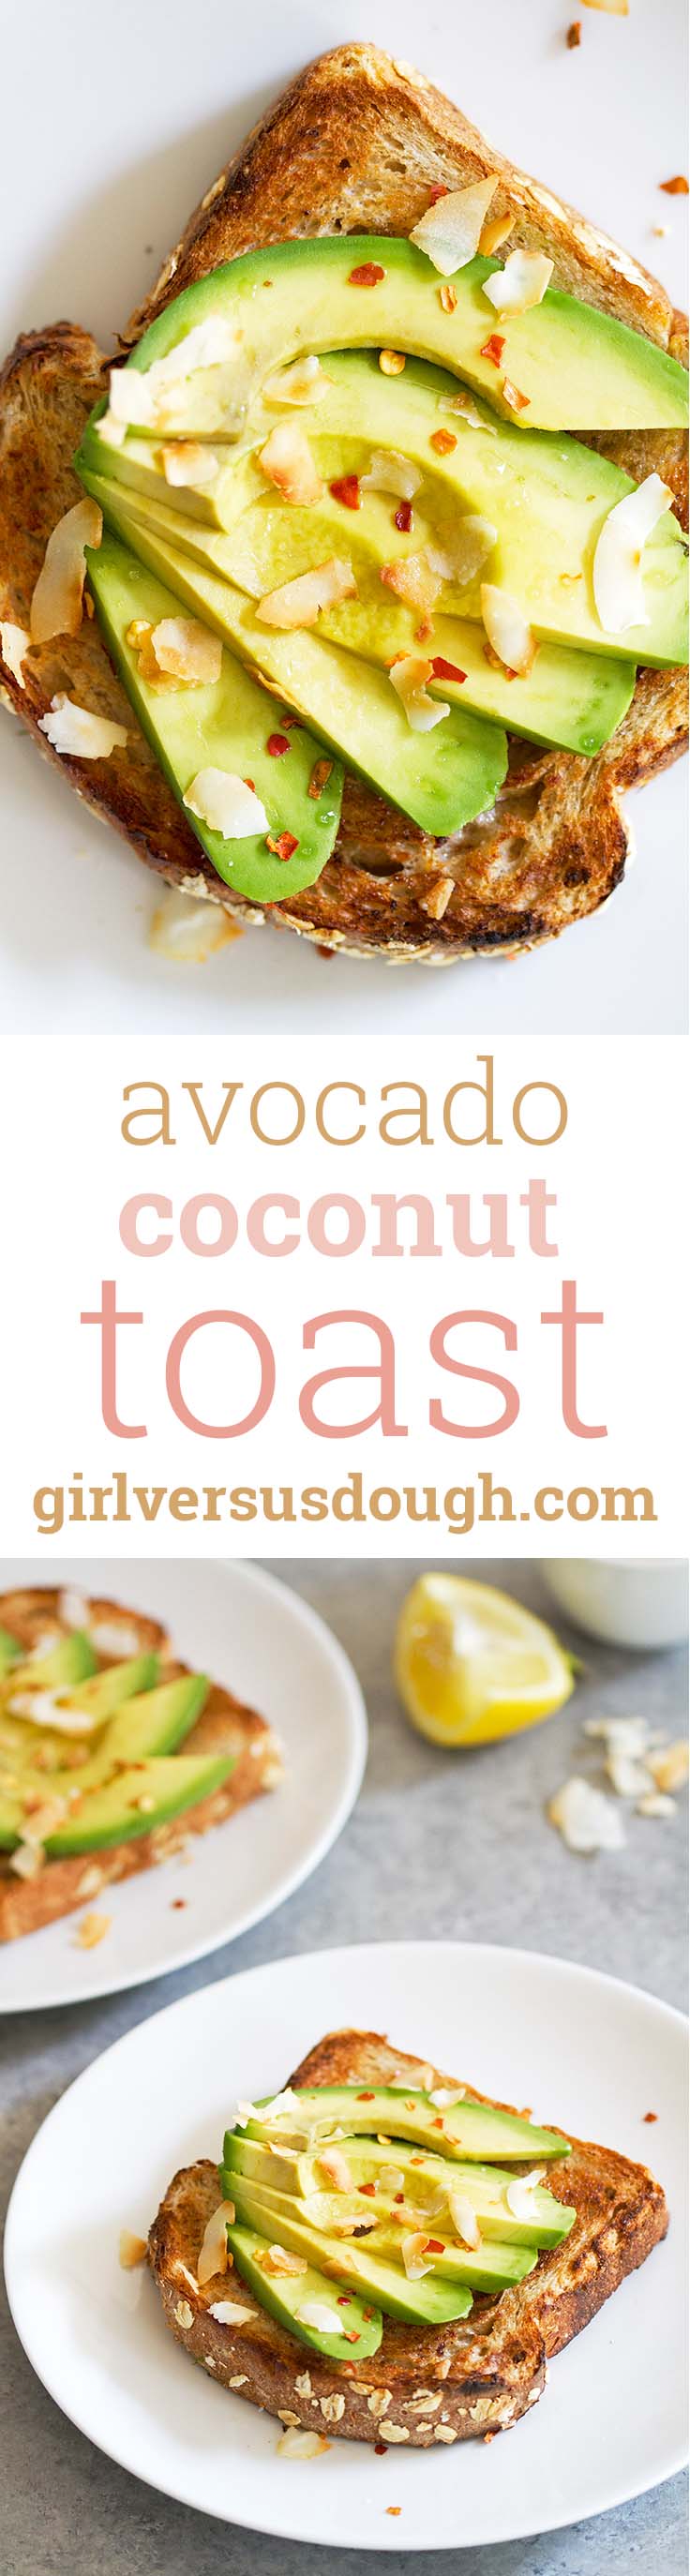 Avocado Coconut Toast -- Up your toast game with this combination of coconut oil, sliced avocado, toasted coconut flakes and fresh lemon. girlversusdough.com @girlversusdough